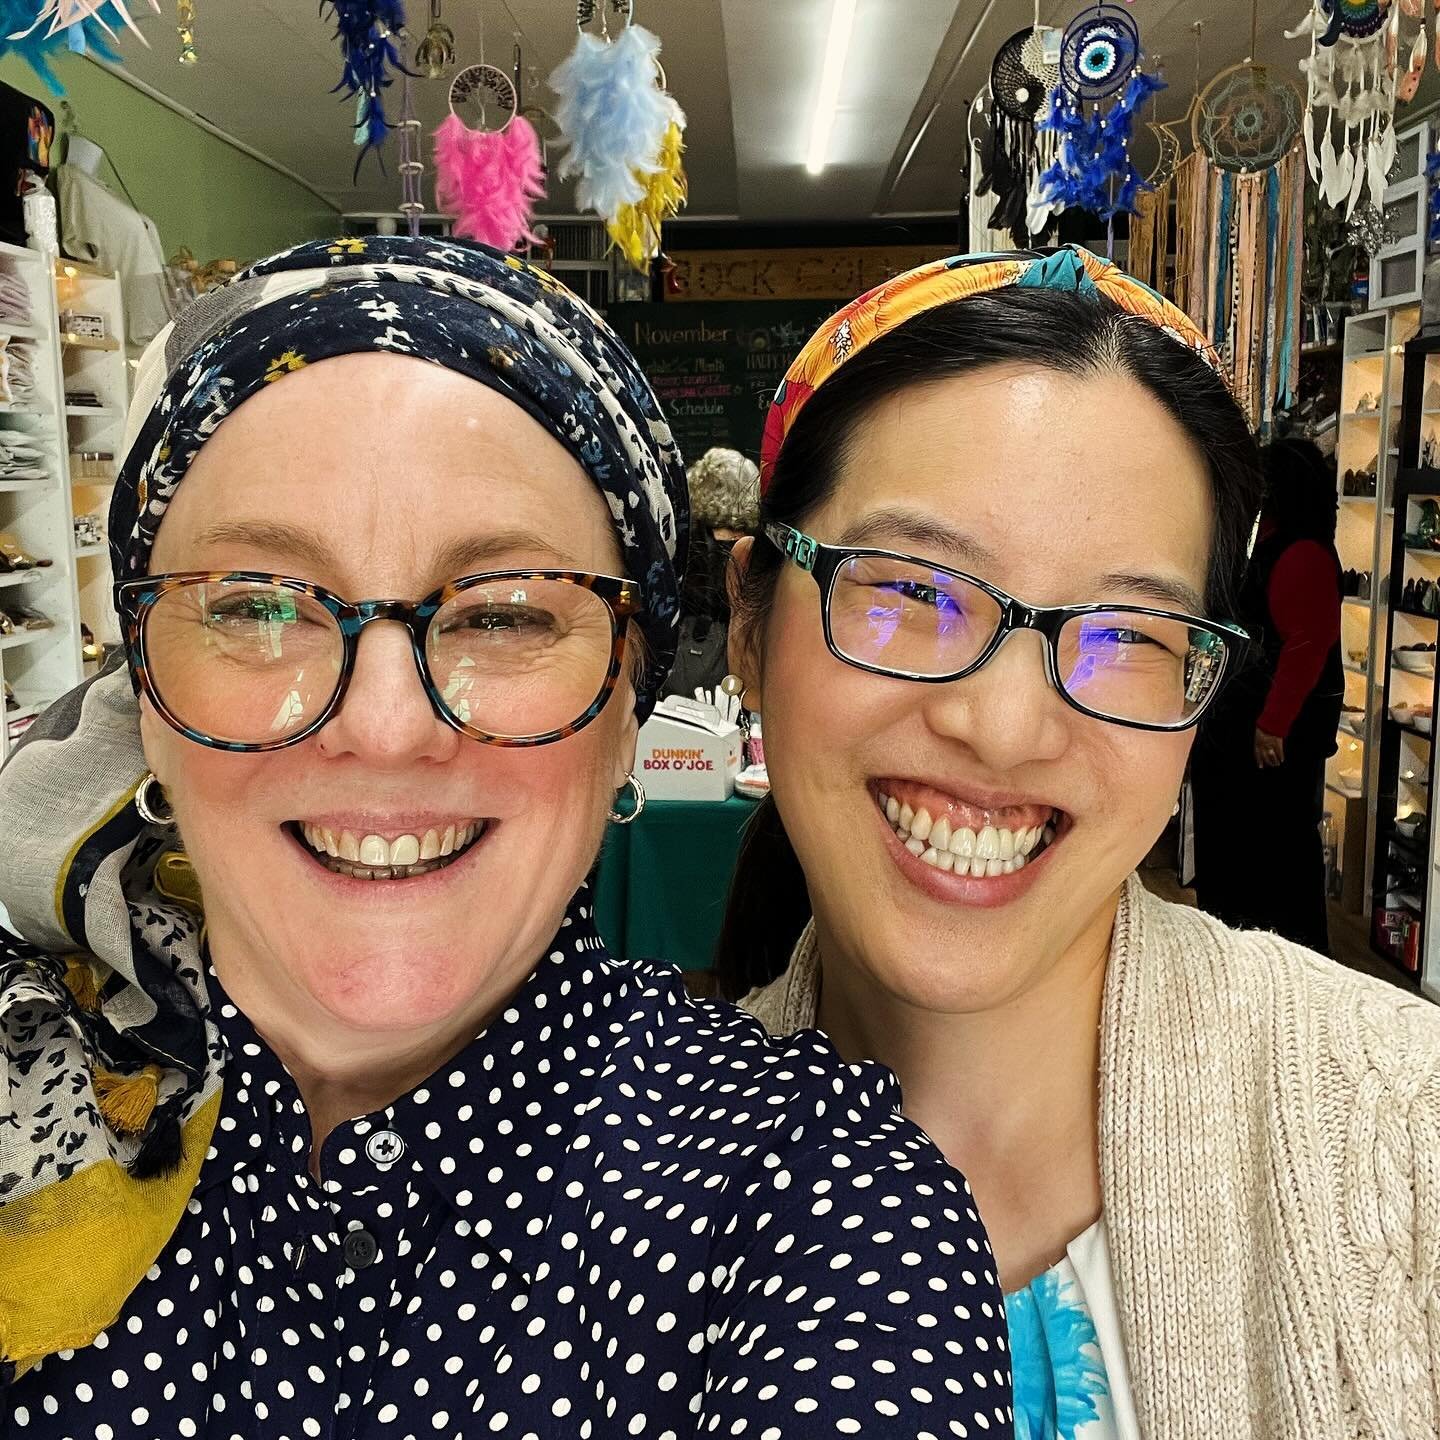 I joined @nawbo_ncnj! @charissahyongphotography invited me to the event at @rockcollage in Teaneck and I was so impressed, I had to be part of it too. 

And look who else was there! 🎉 I met @crystalgia_by_deborah in a webinar by @wcecnj and we staye